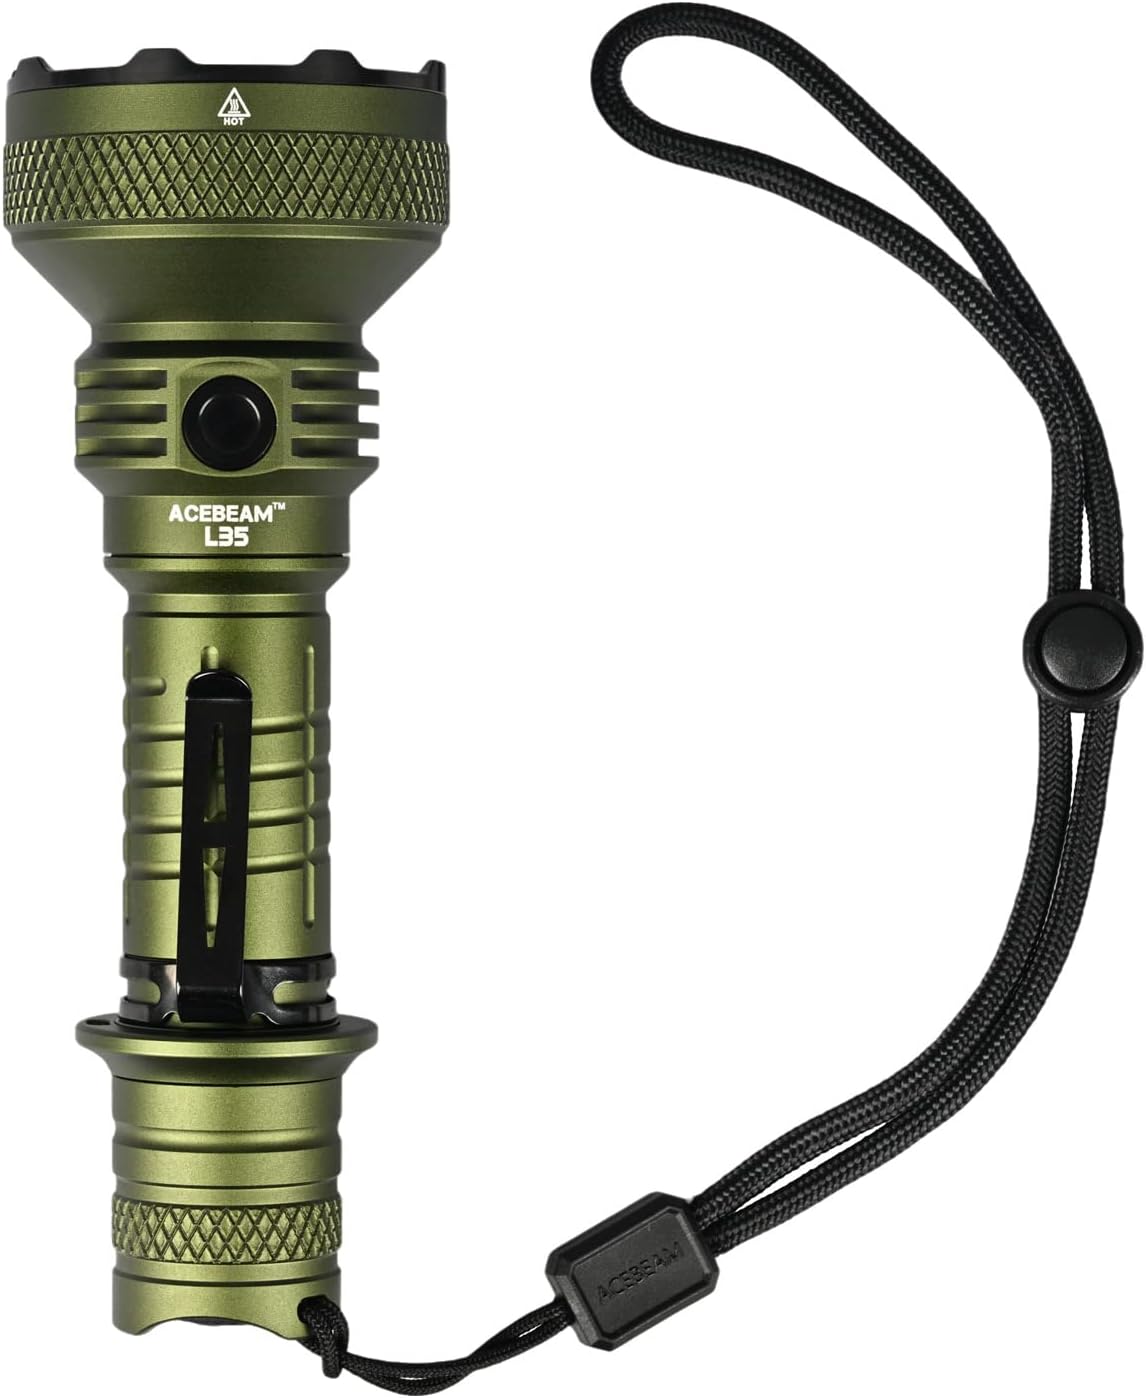 ACEBEAM L35 5000 High Lumens Rechargeable Tactical Flashlight